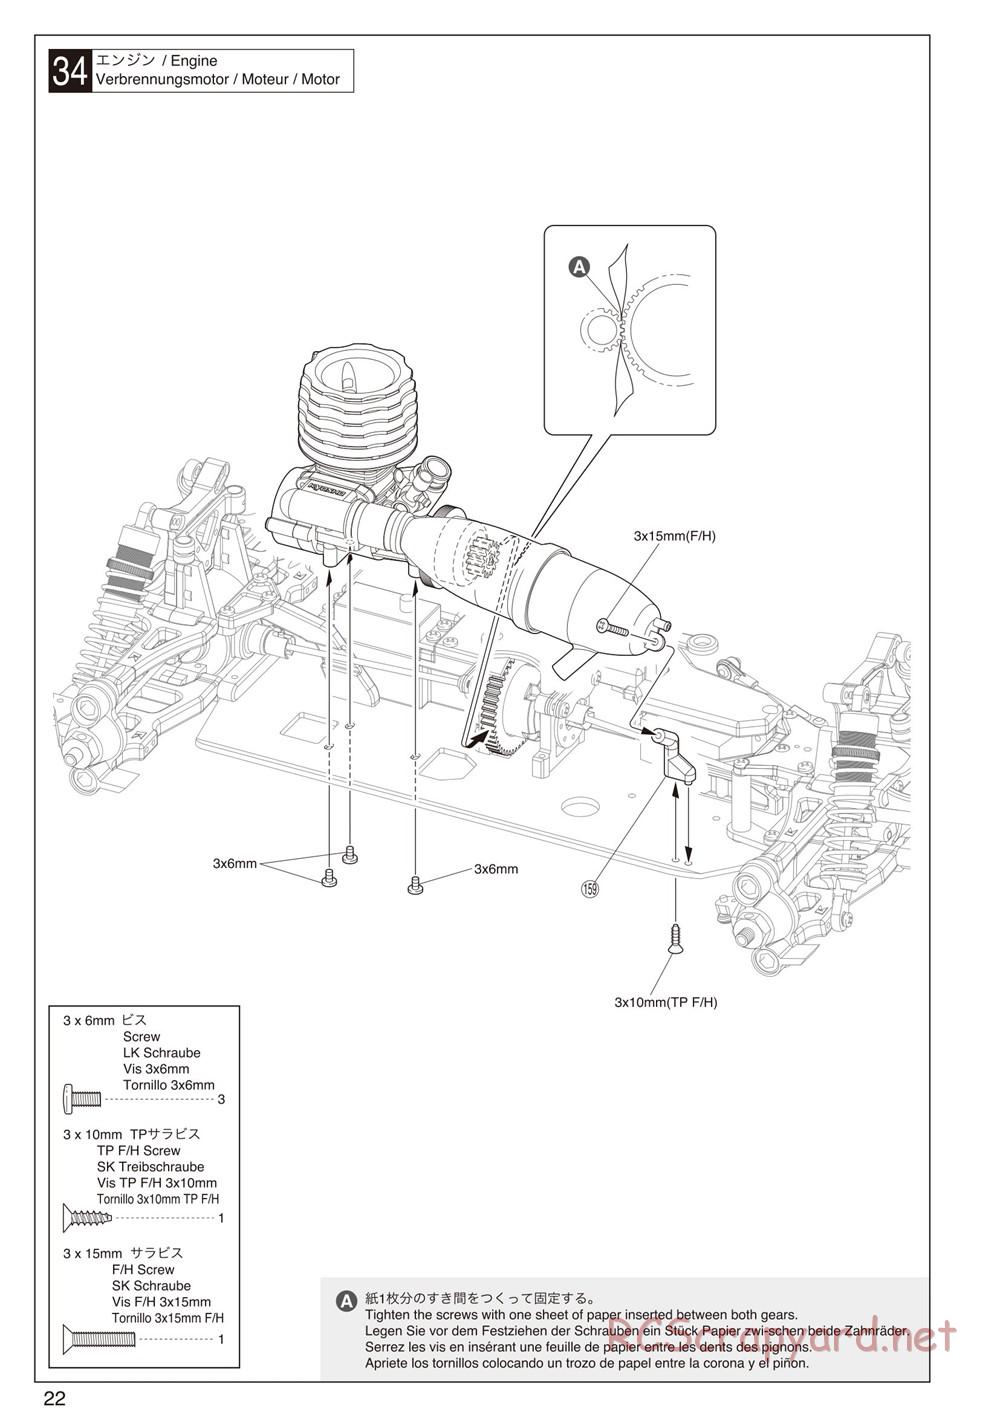 Kyosho - DRX - Manual - Page 22